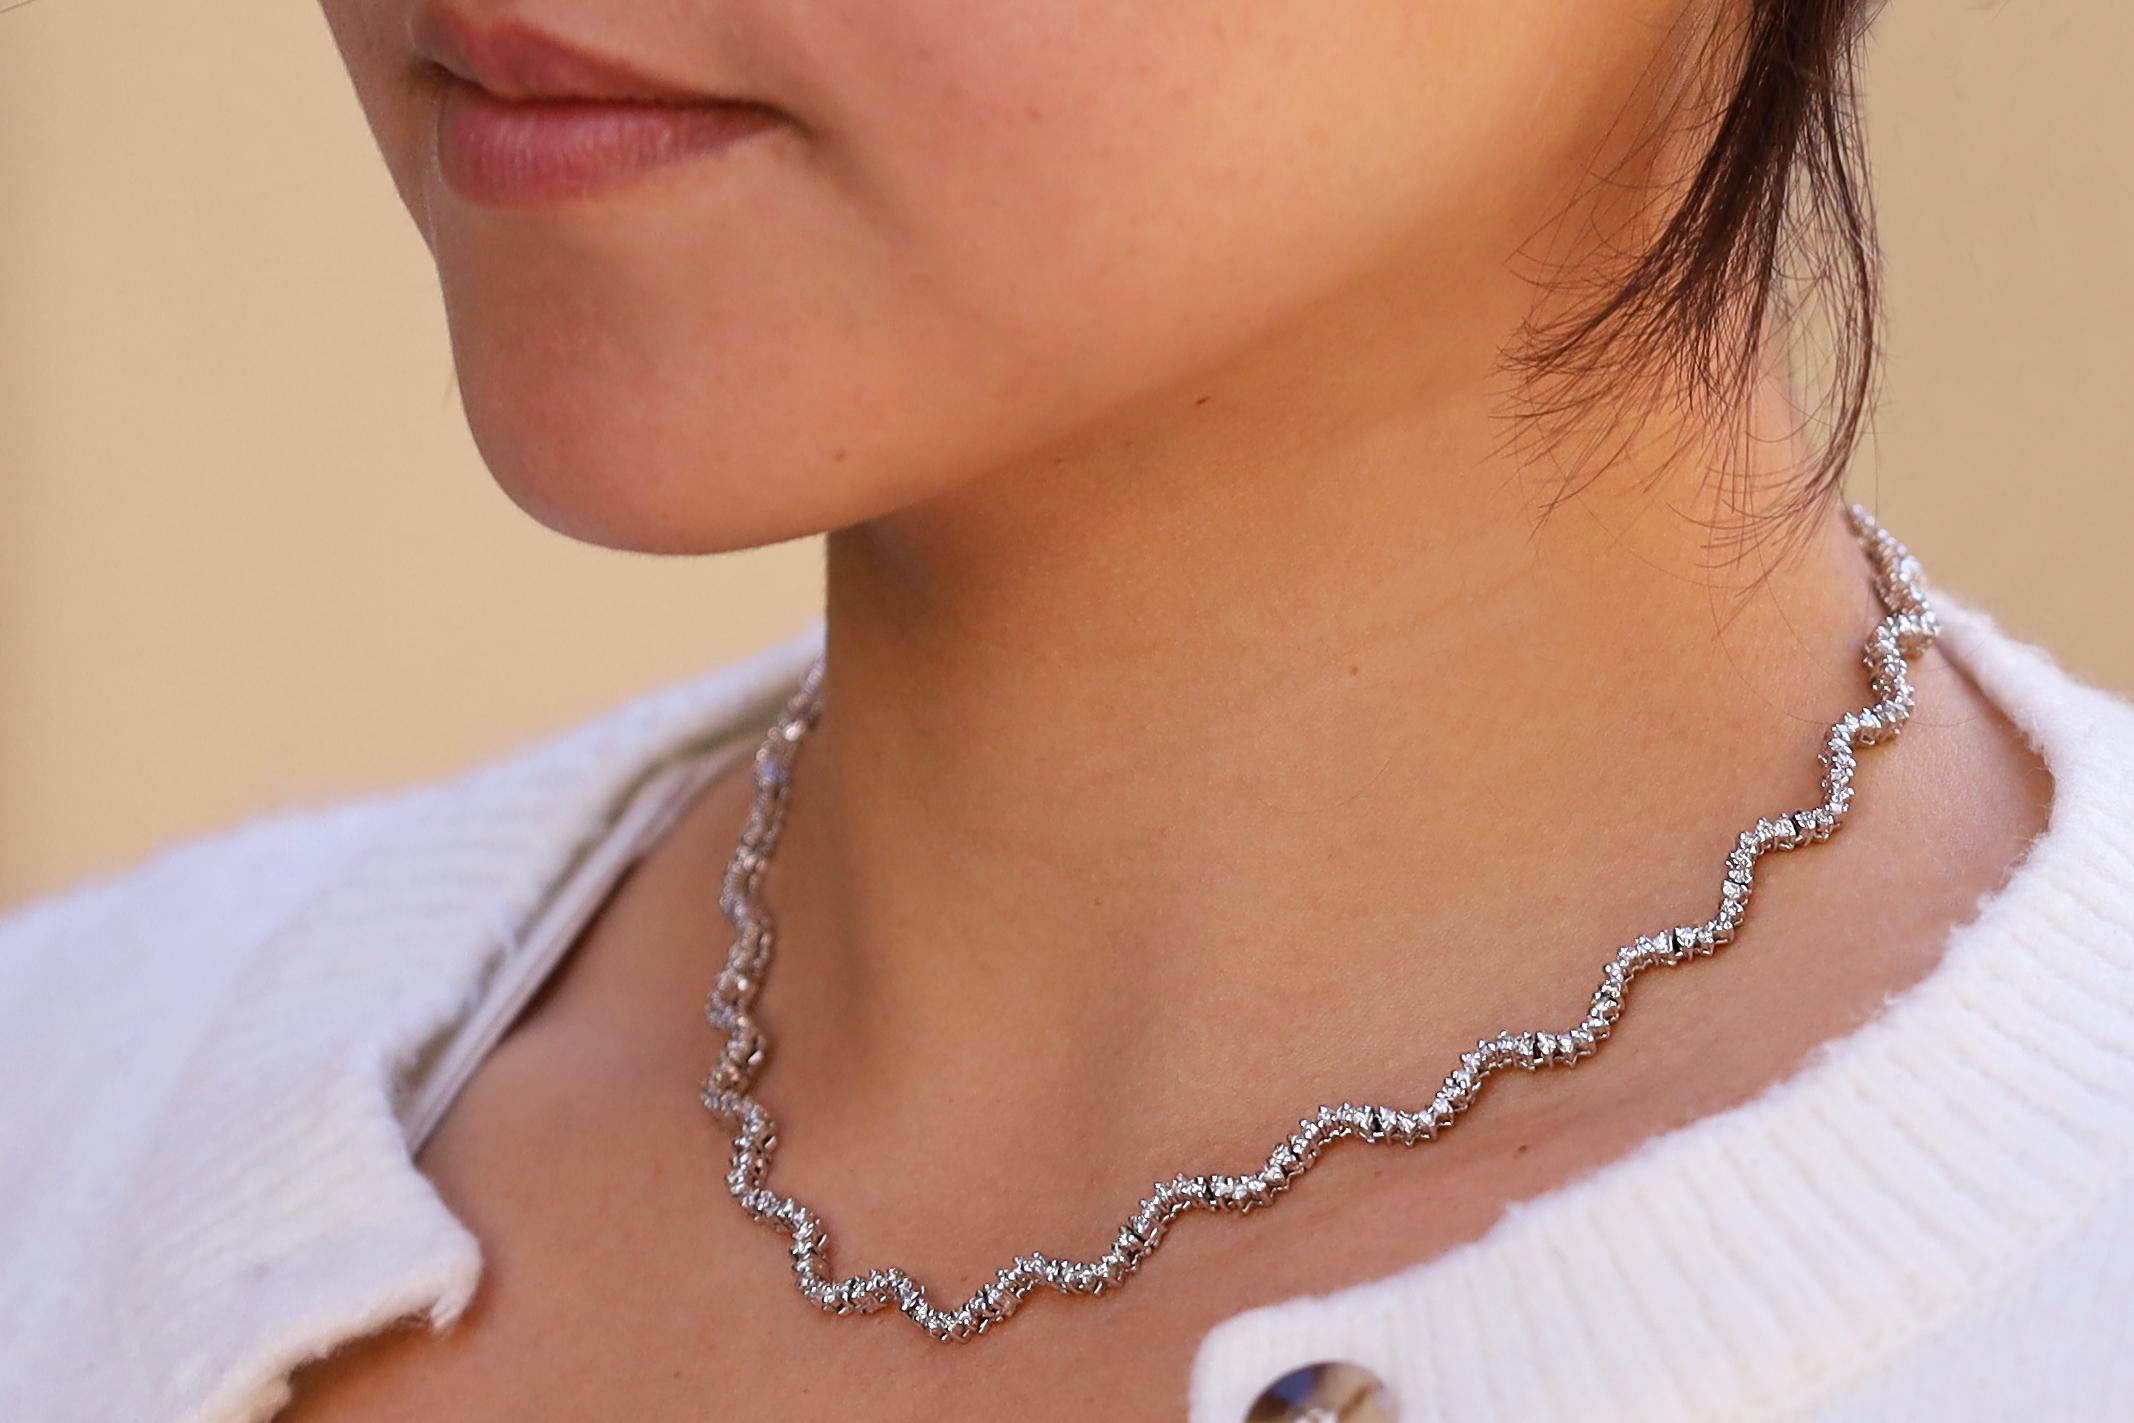 A contemporary classic, this vintage wavy tennis necklace emanates high fashion luxe. Expertly crafted in 14 karat white gold, a dazzling river of 240 diamonds adorn the entire length which totals 2 1/2 carats. Easy to style and appealing while worn